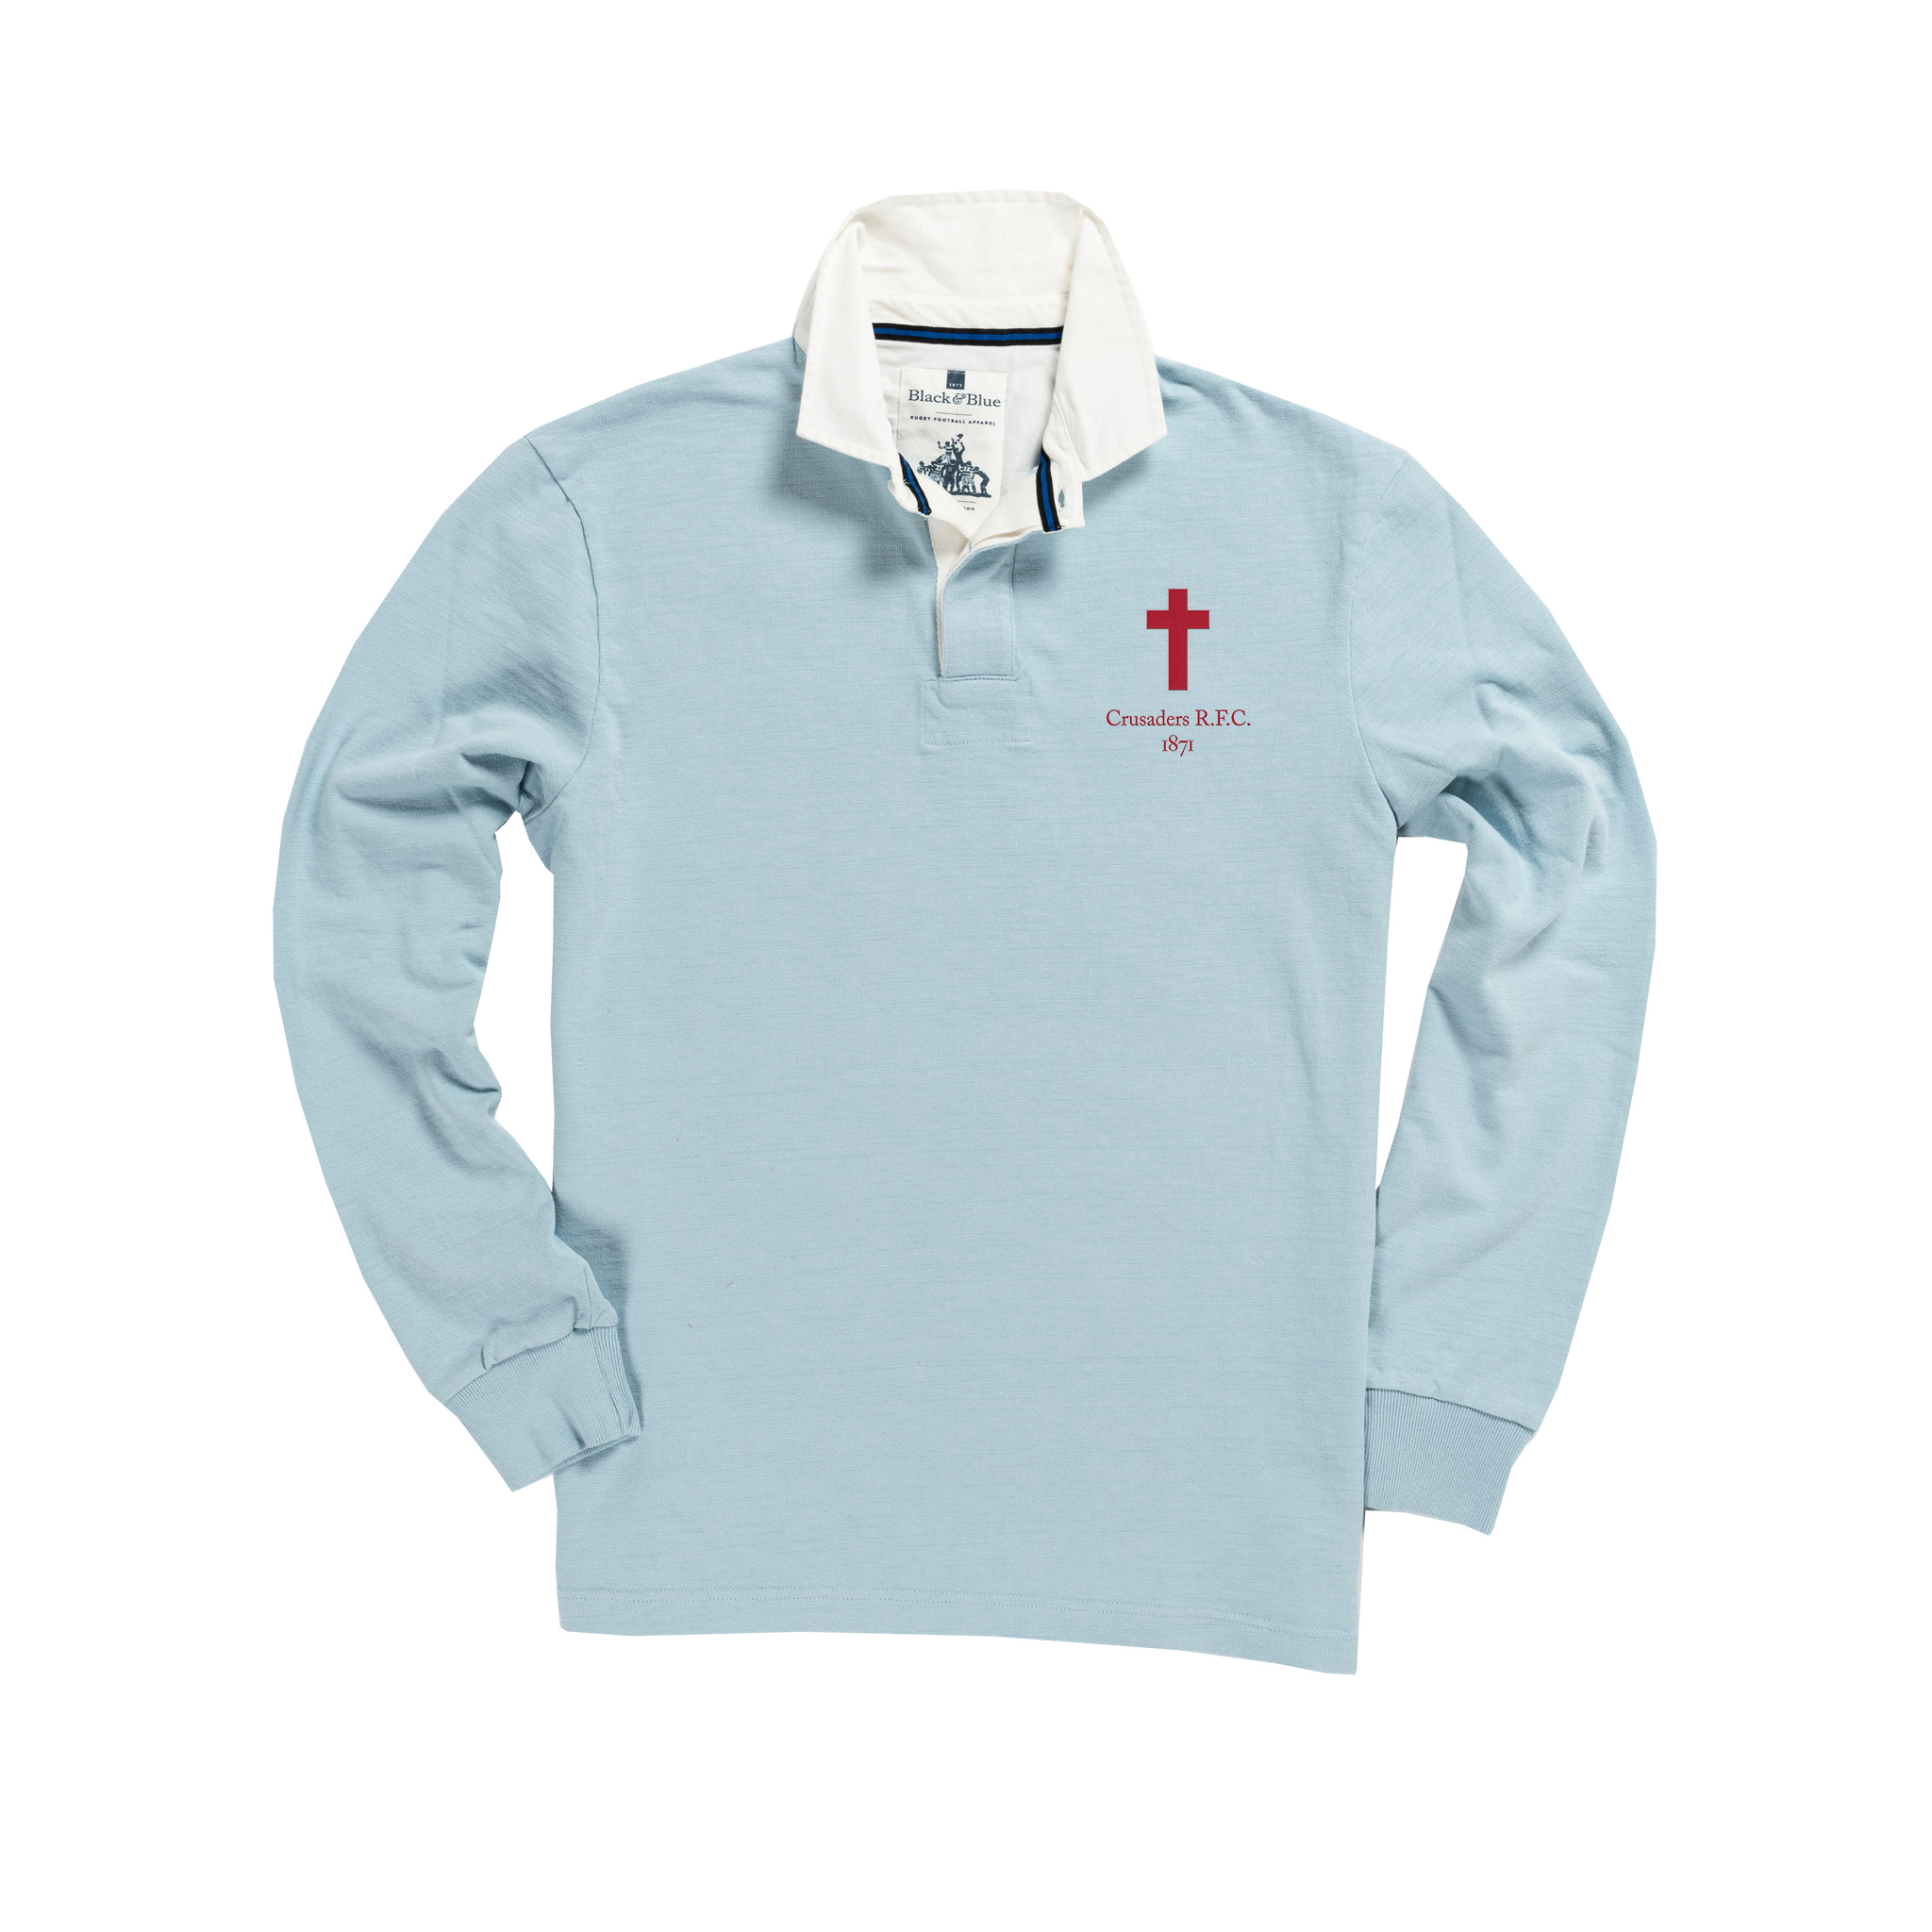 Crusaders 1871 Rugby Shirt_Front